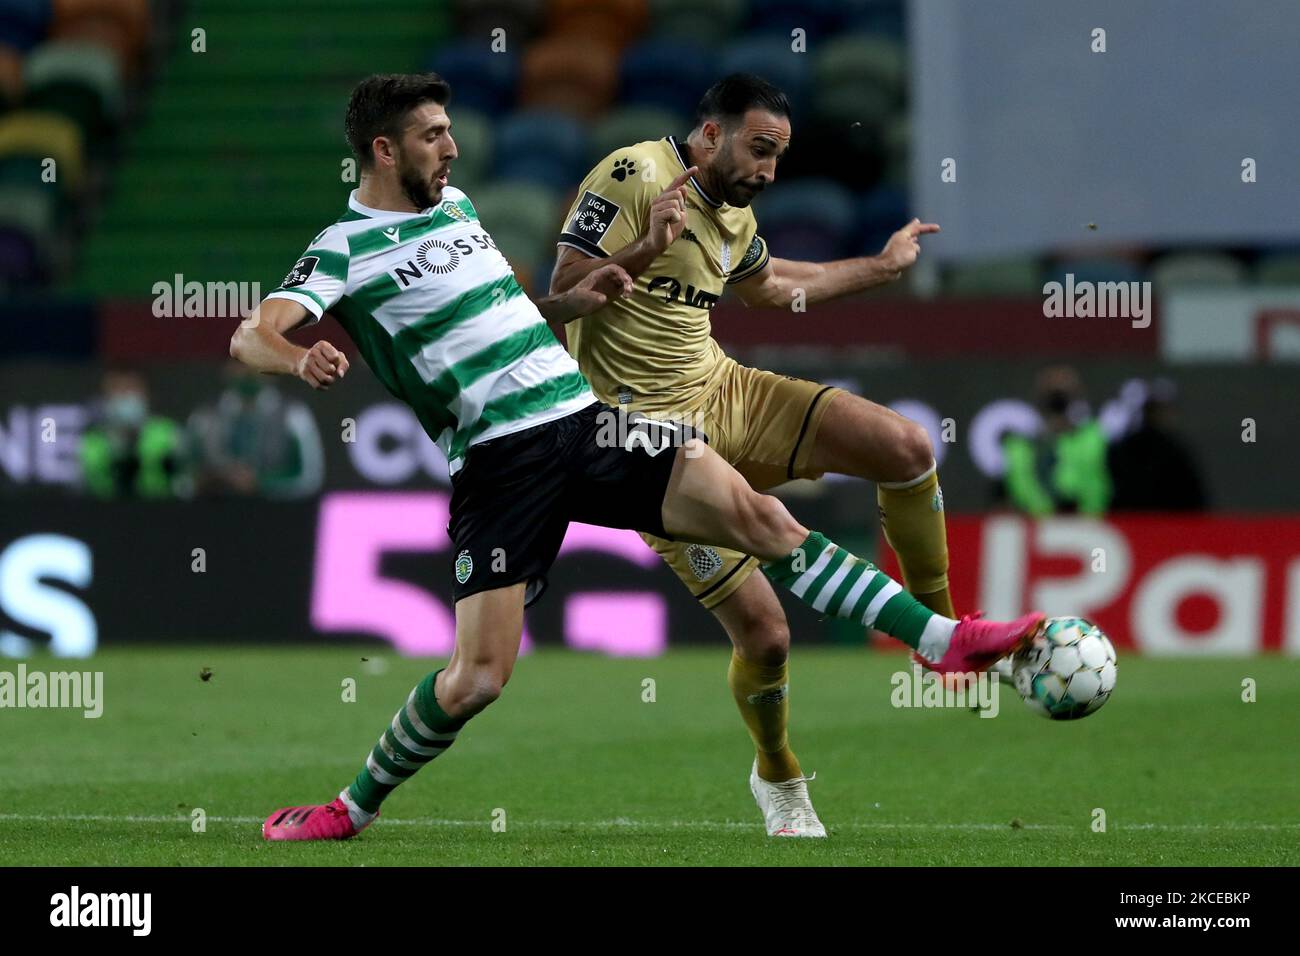 Paulinho of Sporting CP (L) vies with Adil Rami of Boavista FC during the Portuguese League football match between Sporting CP and Boavista FC at Jose Alvalade stadium in Lisbon, Portugal on May 11, 2021. (Photo by Pedro FiÃºza/NurPhoto) Stock Photo